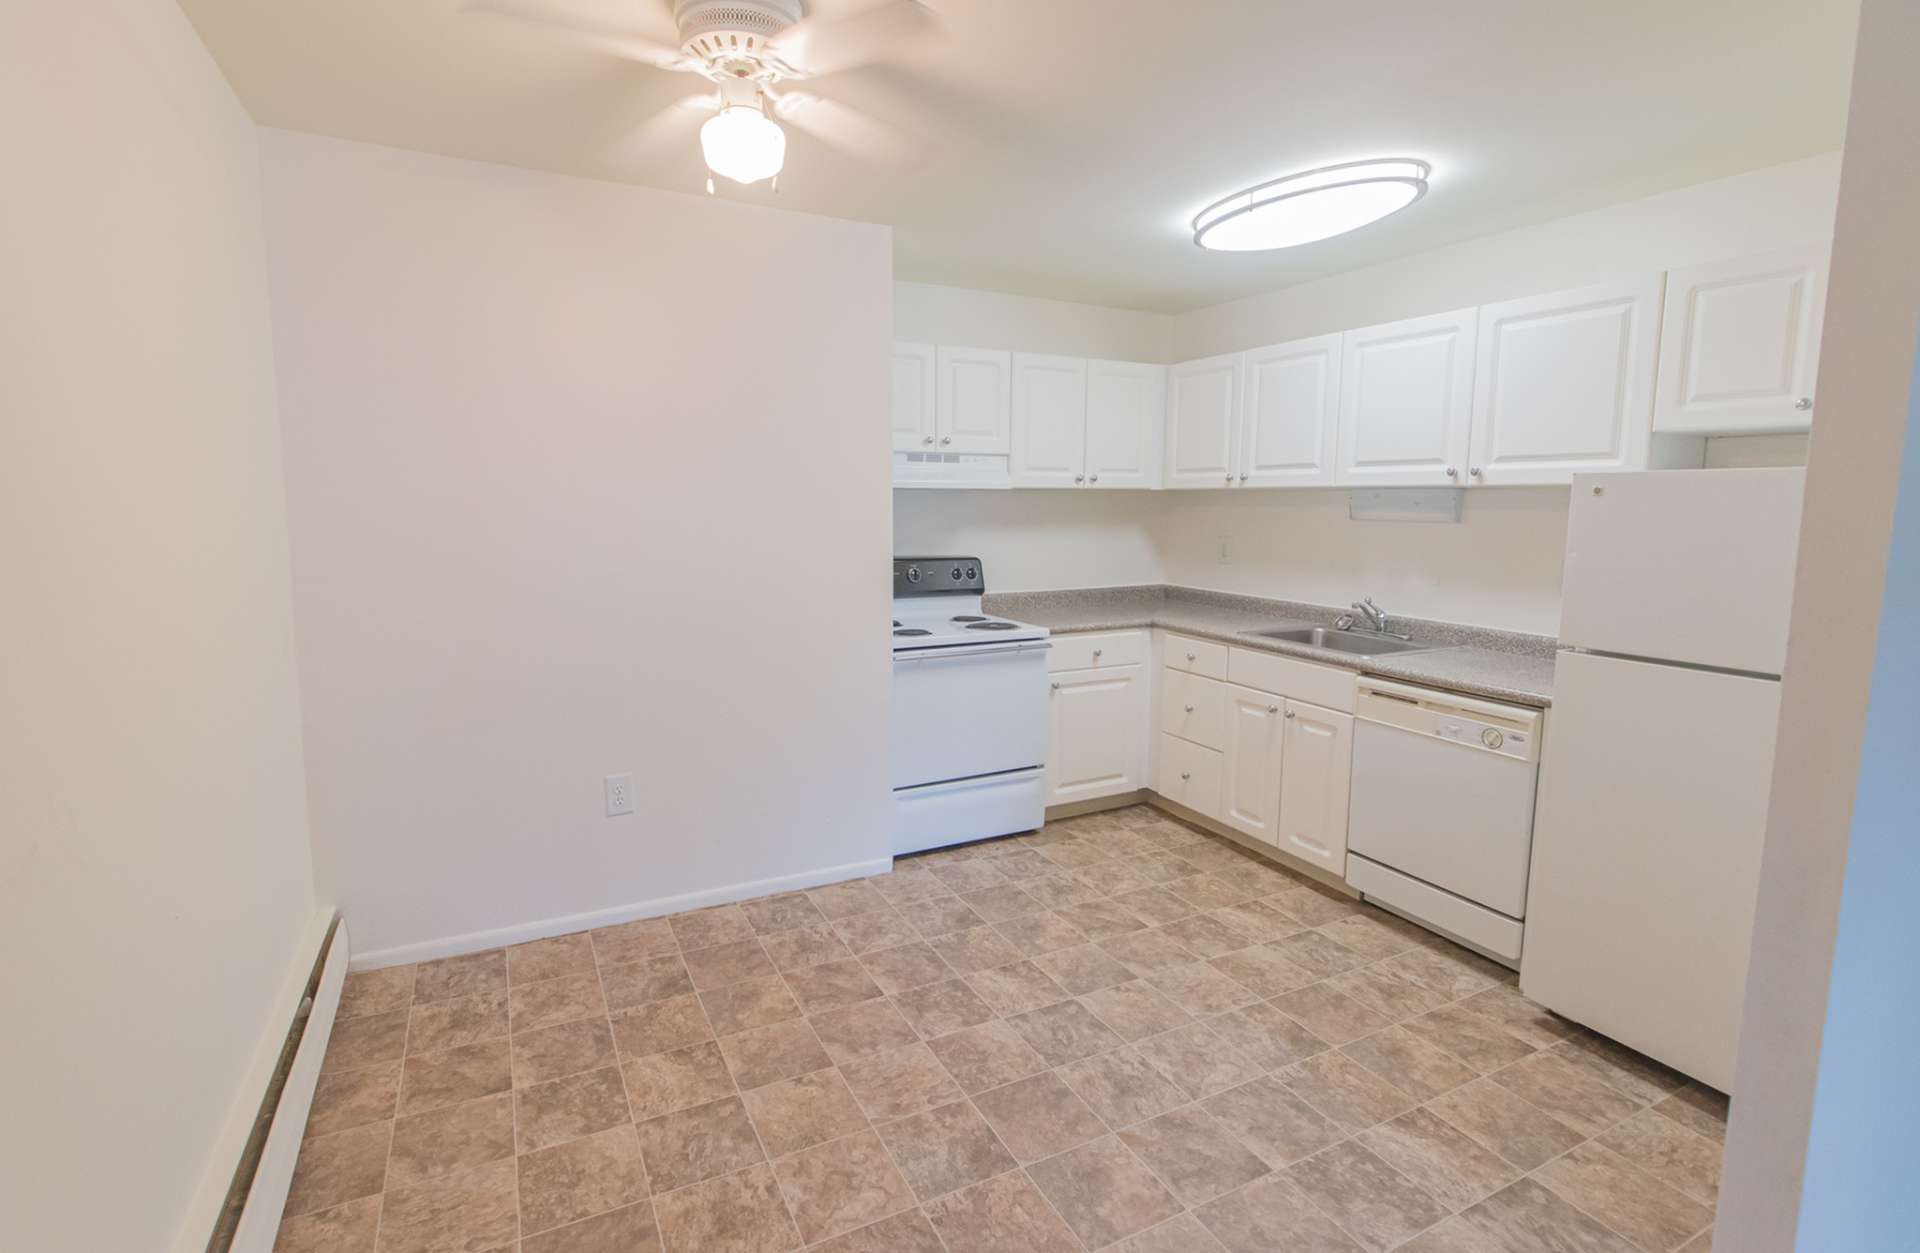 Spacious kitchen and dining area with a ceiling fan and light brown tile flooring.